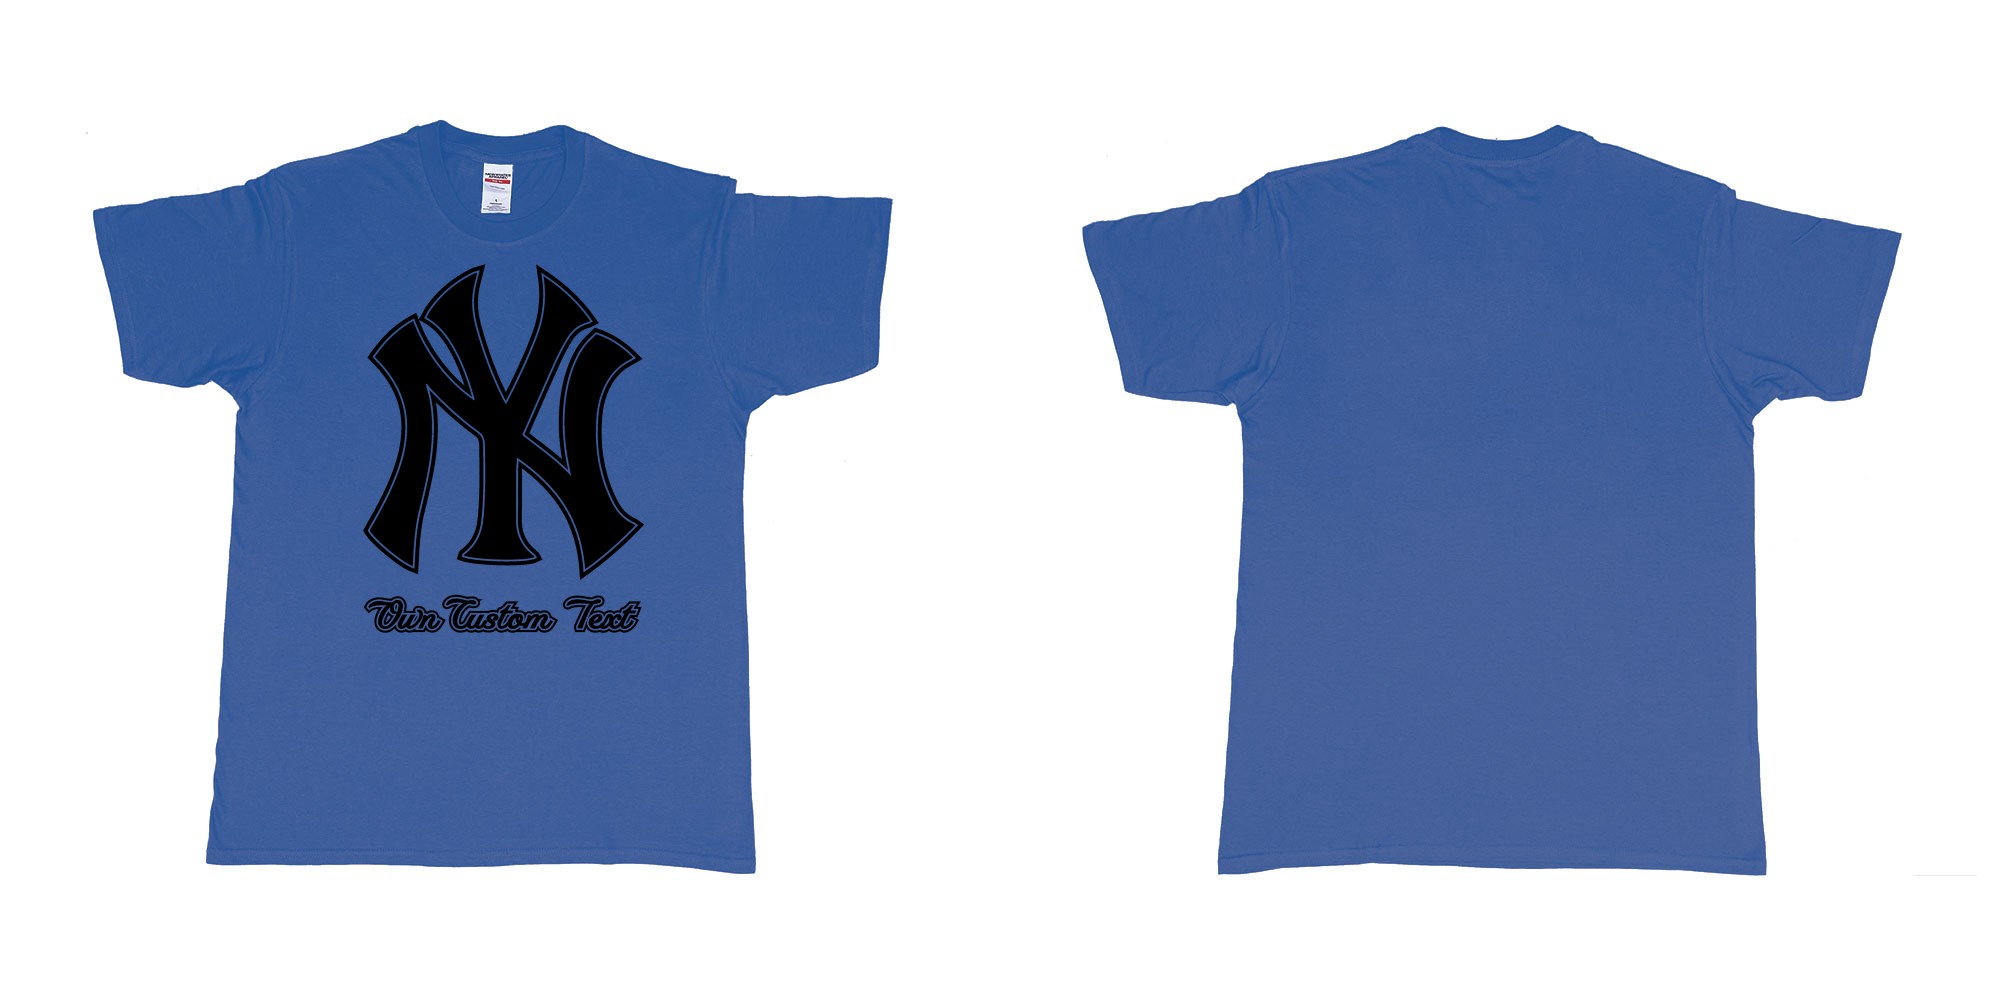 Custom tshirt design new york yankees baseball team custom design in fabric color royal-blue choice your own text made in Bali by The Pirate Way